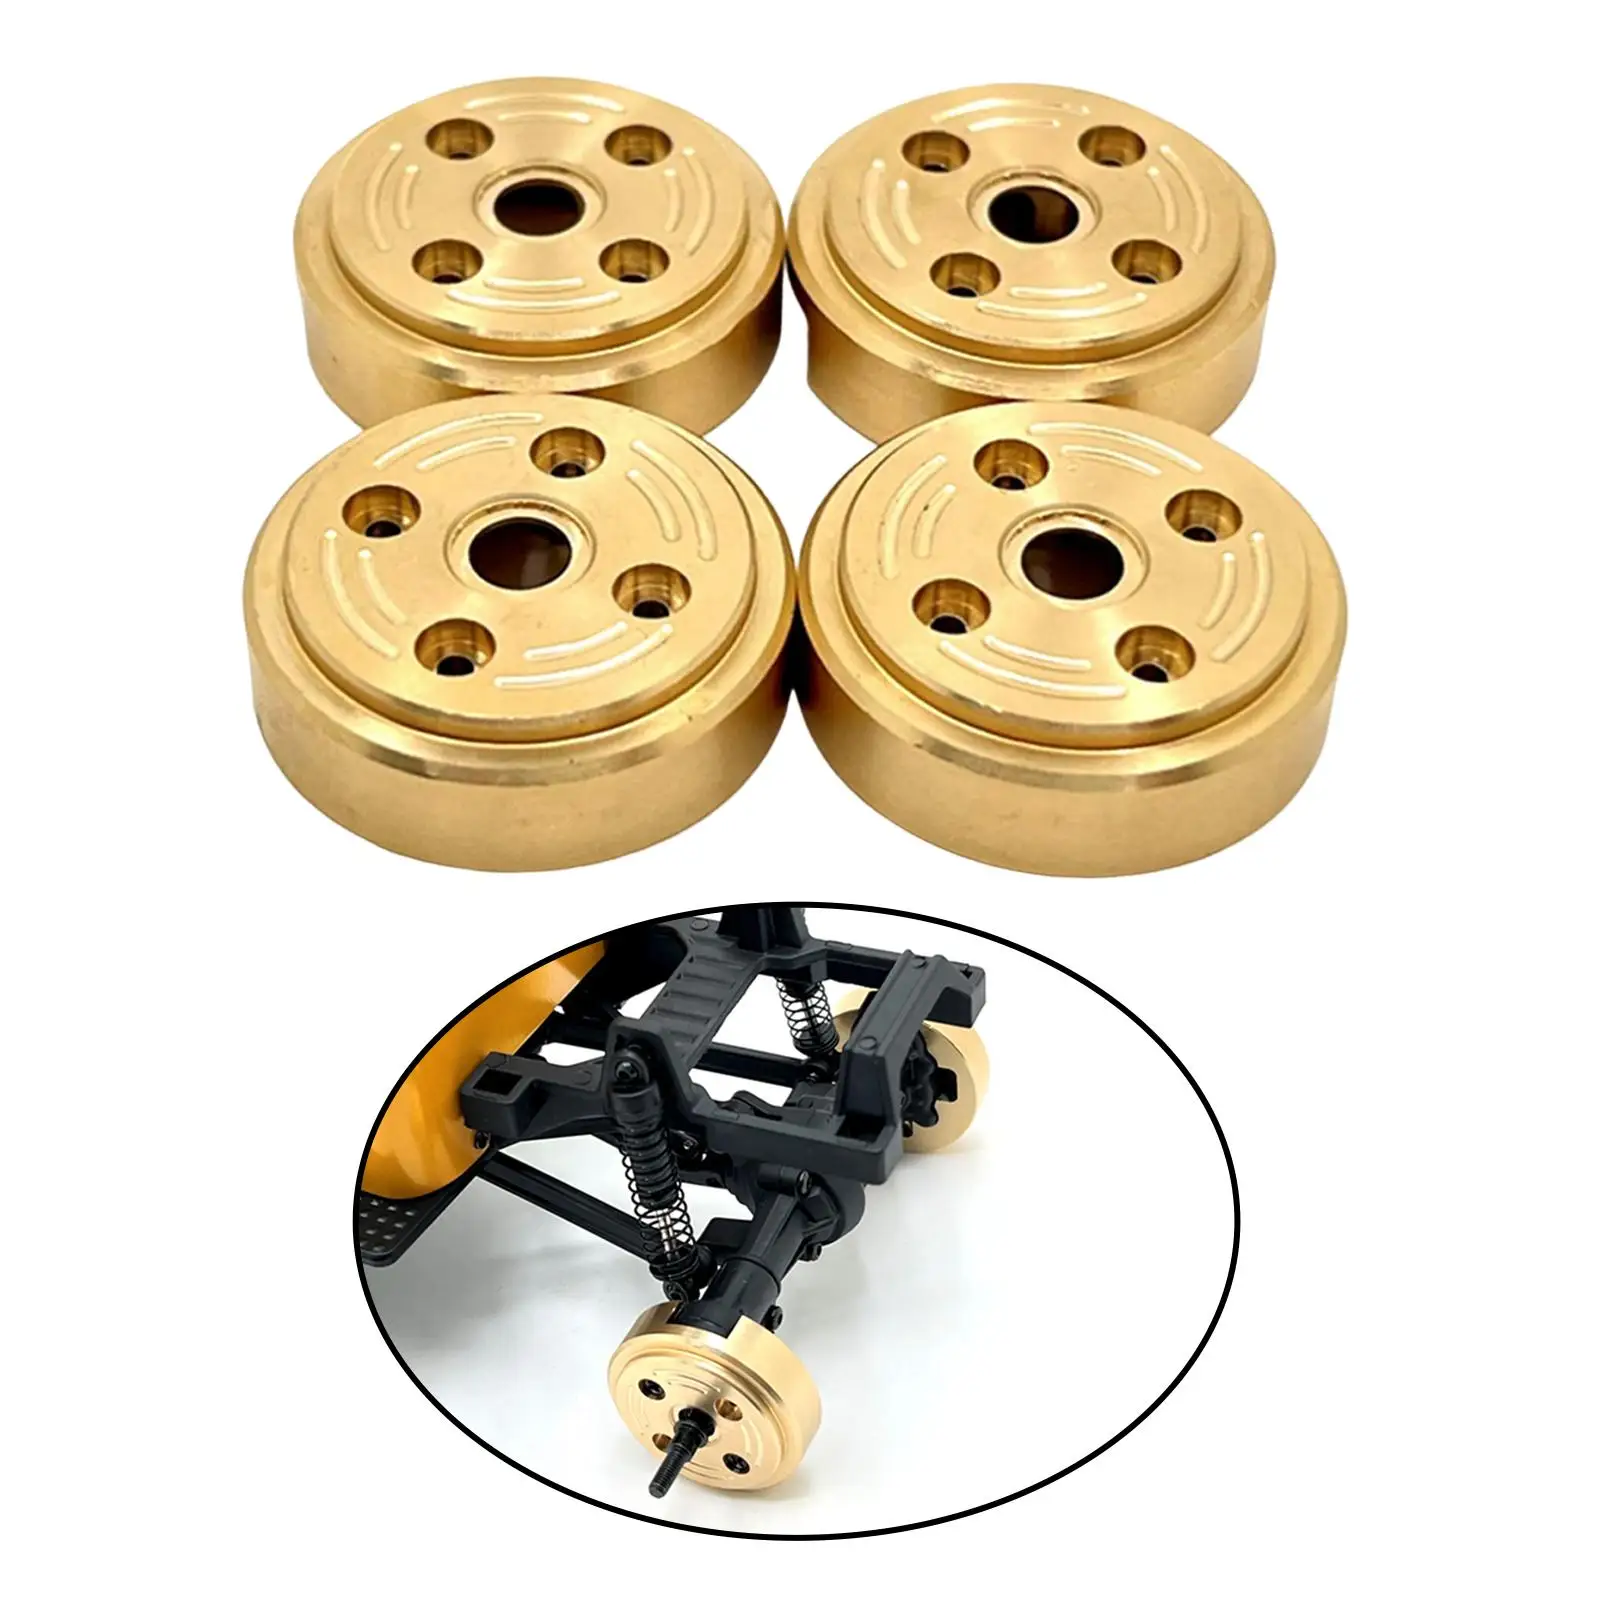 4 Pieces Counterweight Remote Control Car Accessories Clamp Ring, Wheel Weight, for 1/24 RC Crawler Axial Upgrade Parts Tractor